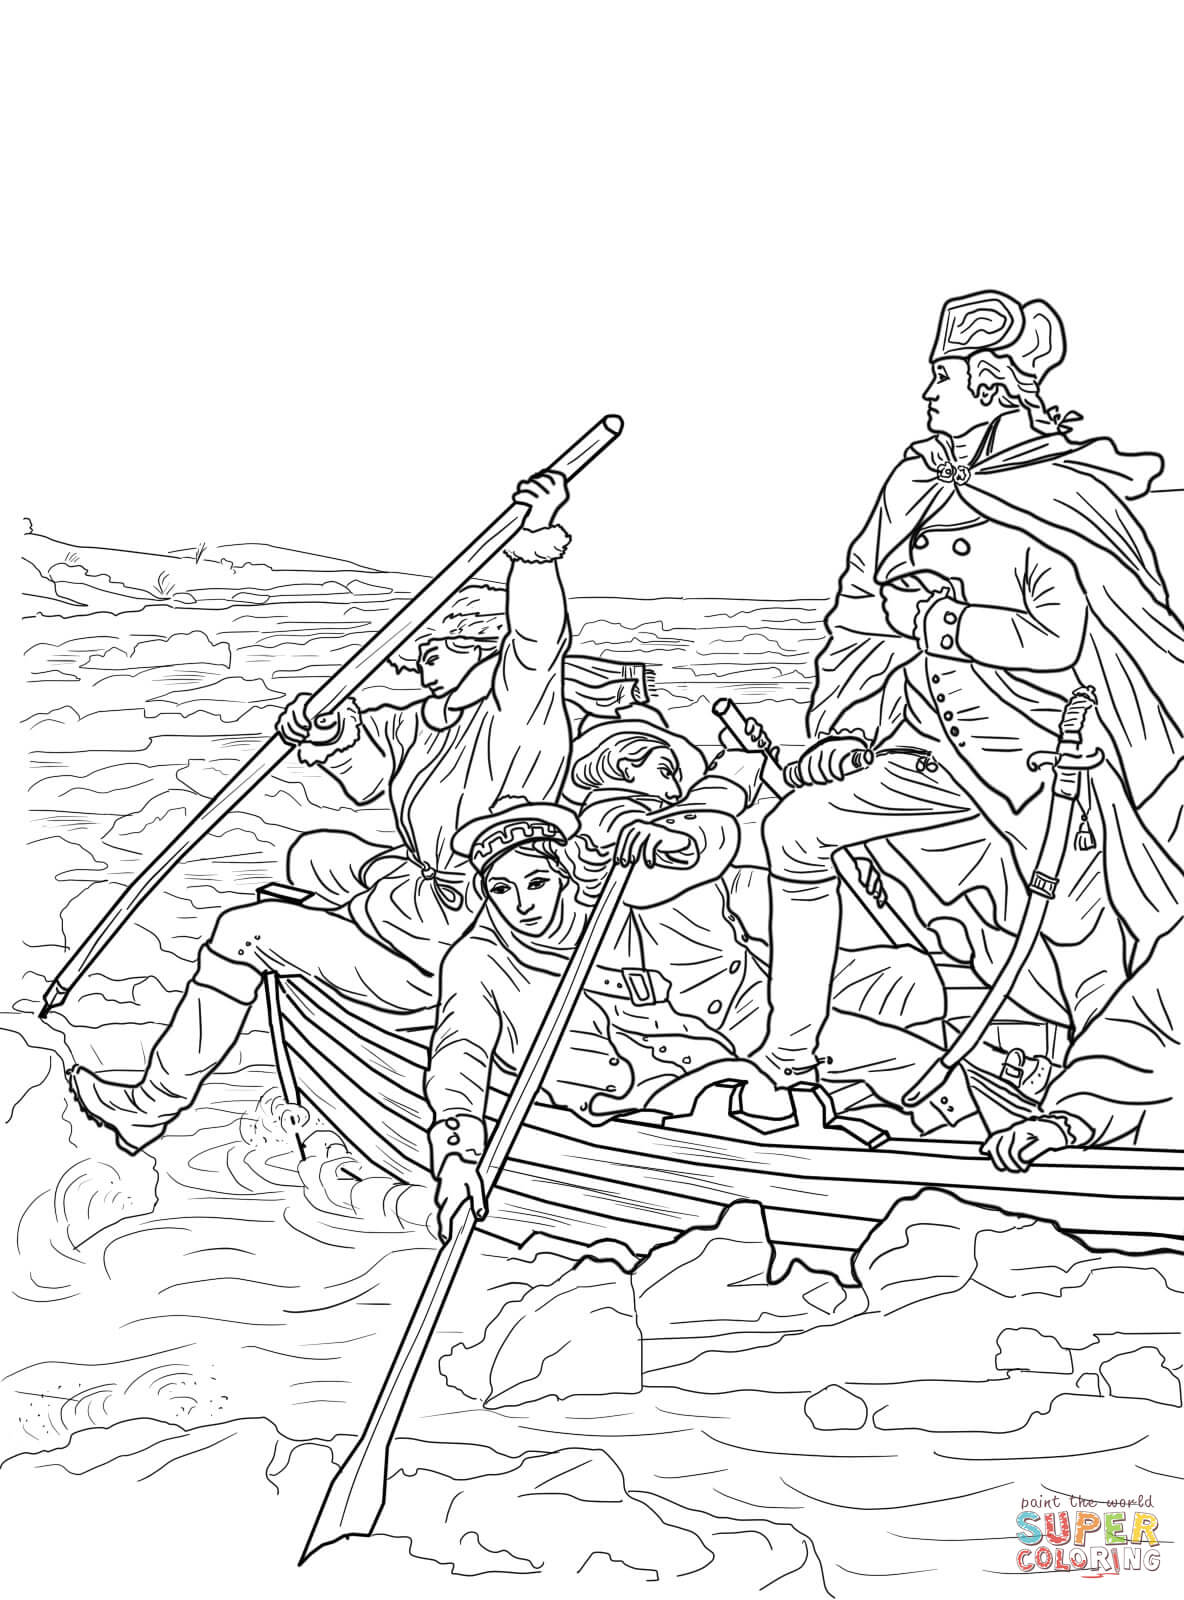 American Revolutionary War coloring pages | Free Coloring Pages